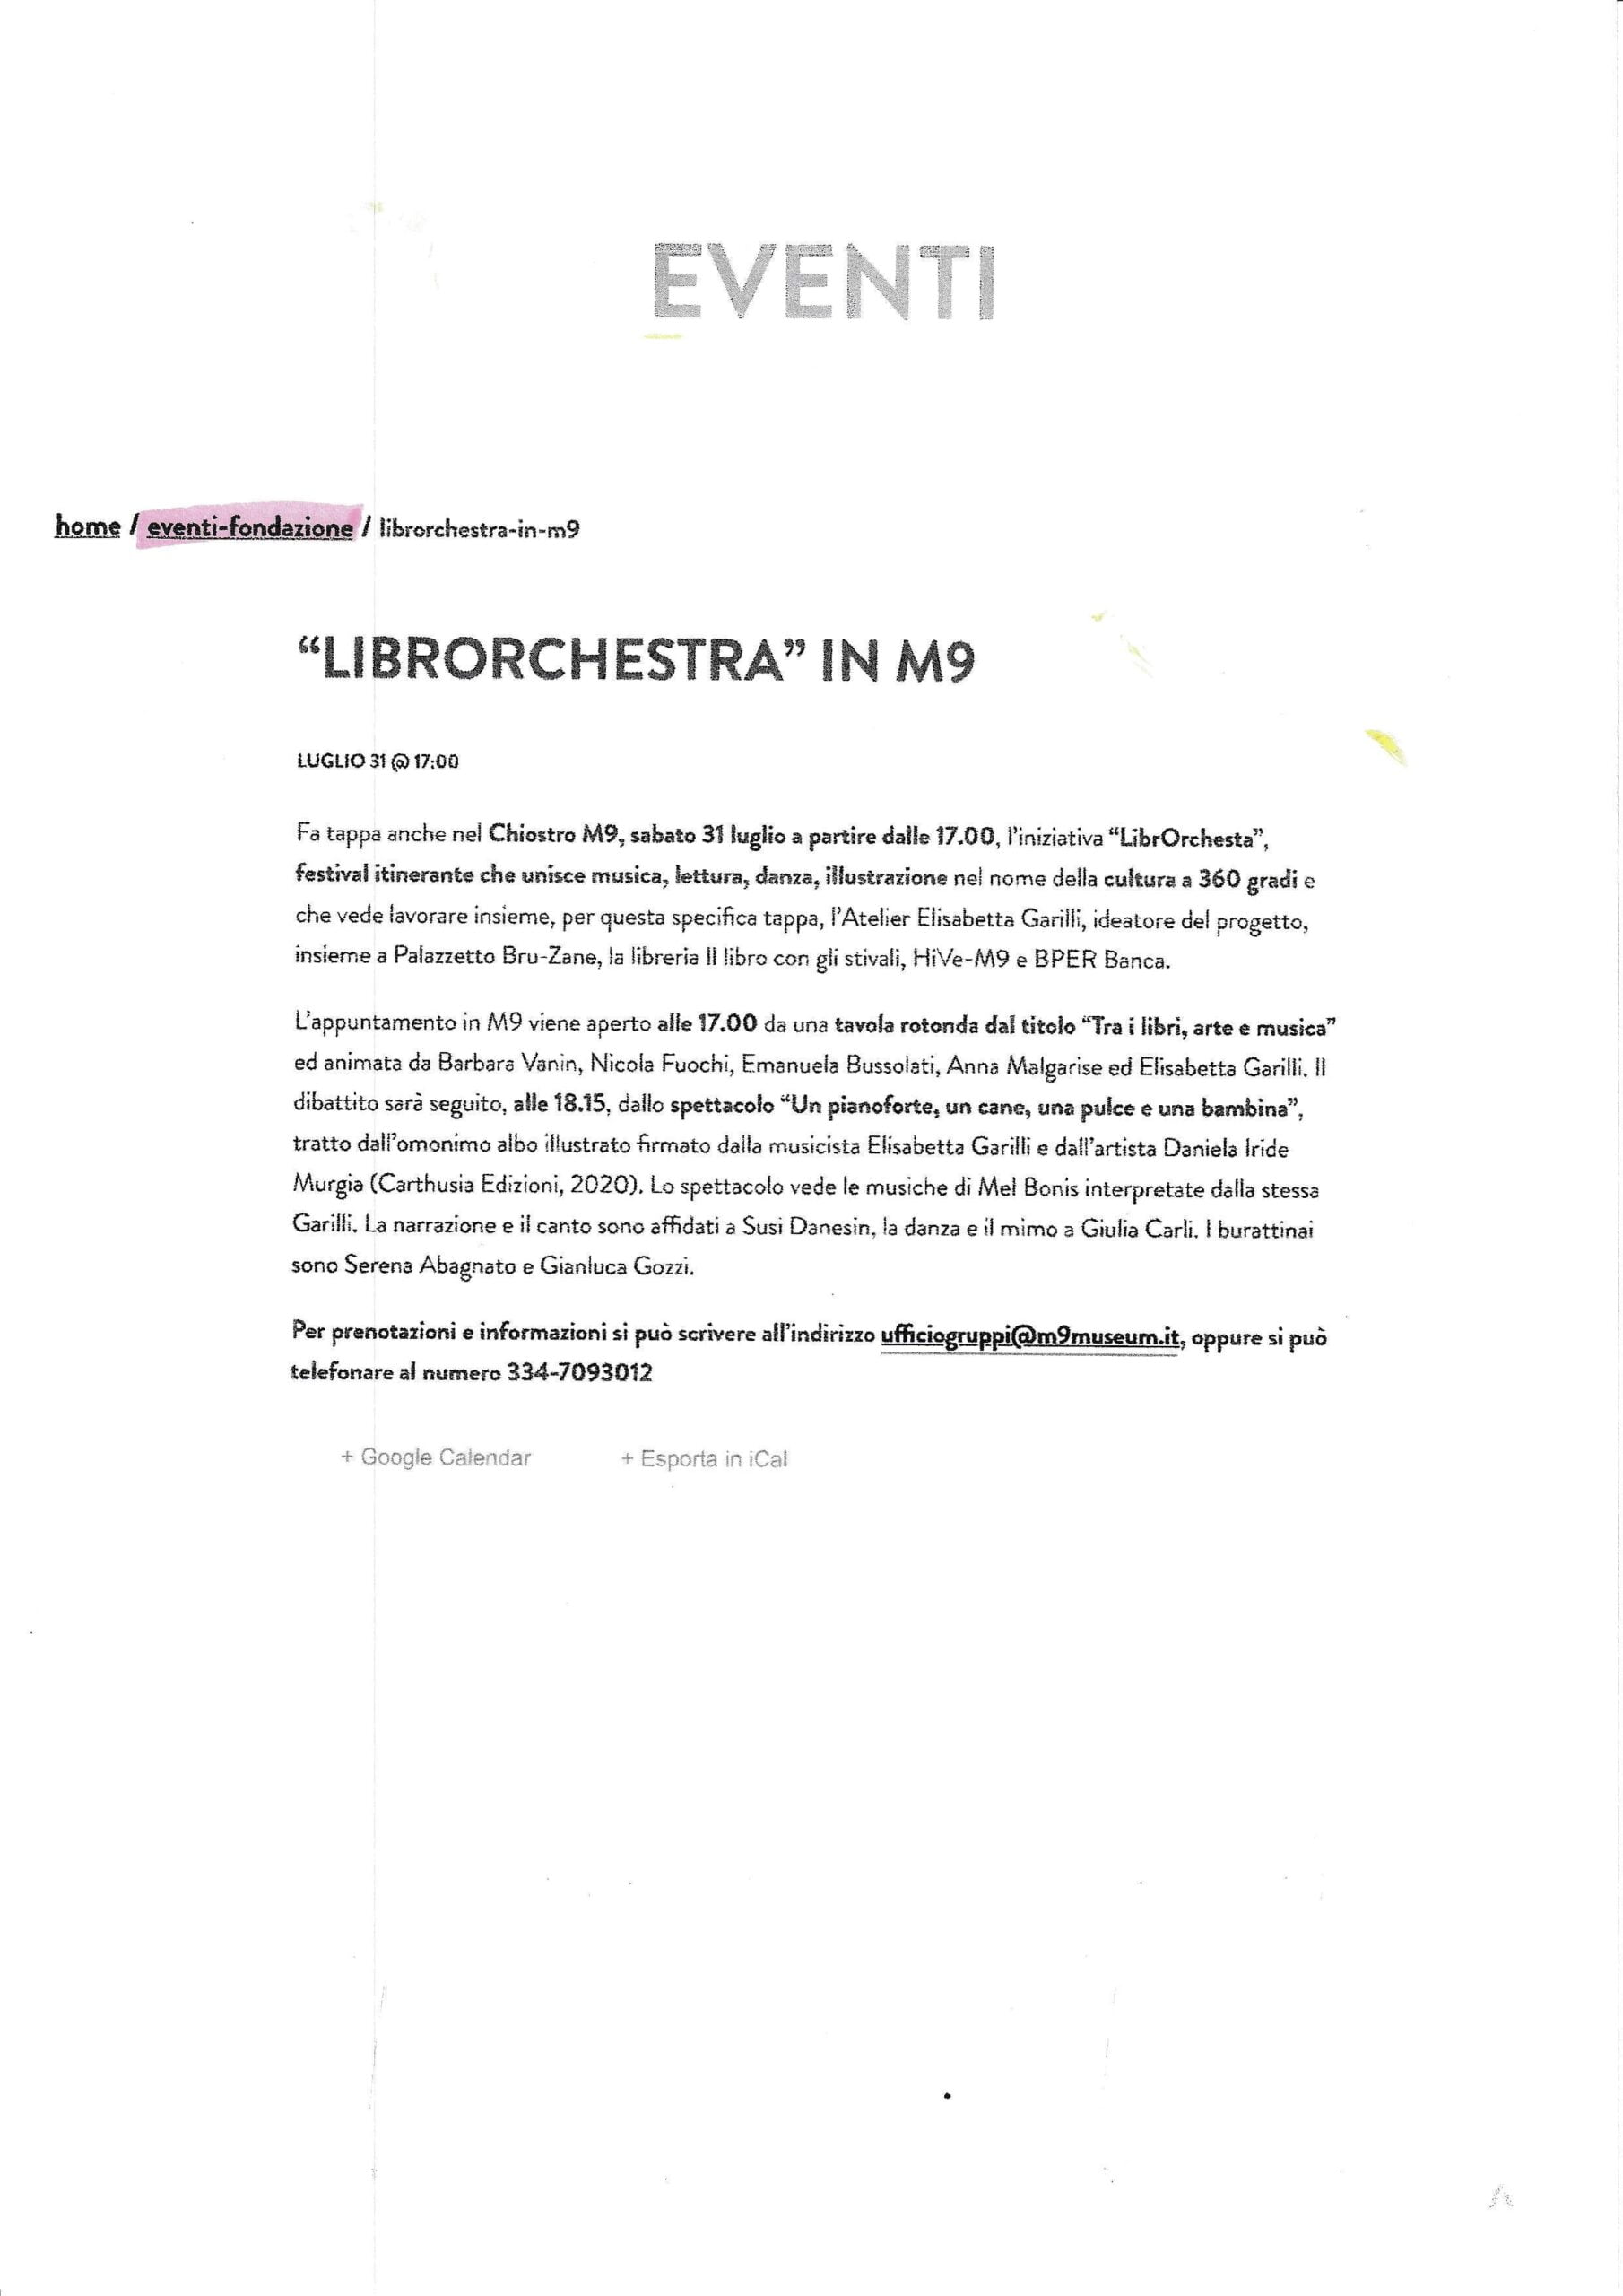 2021.07.30 M9 website Librorchestra in M9 scaled